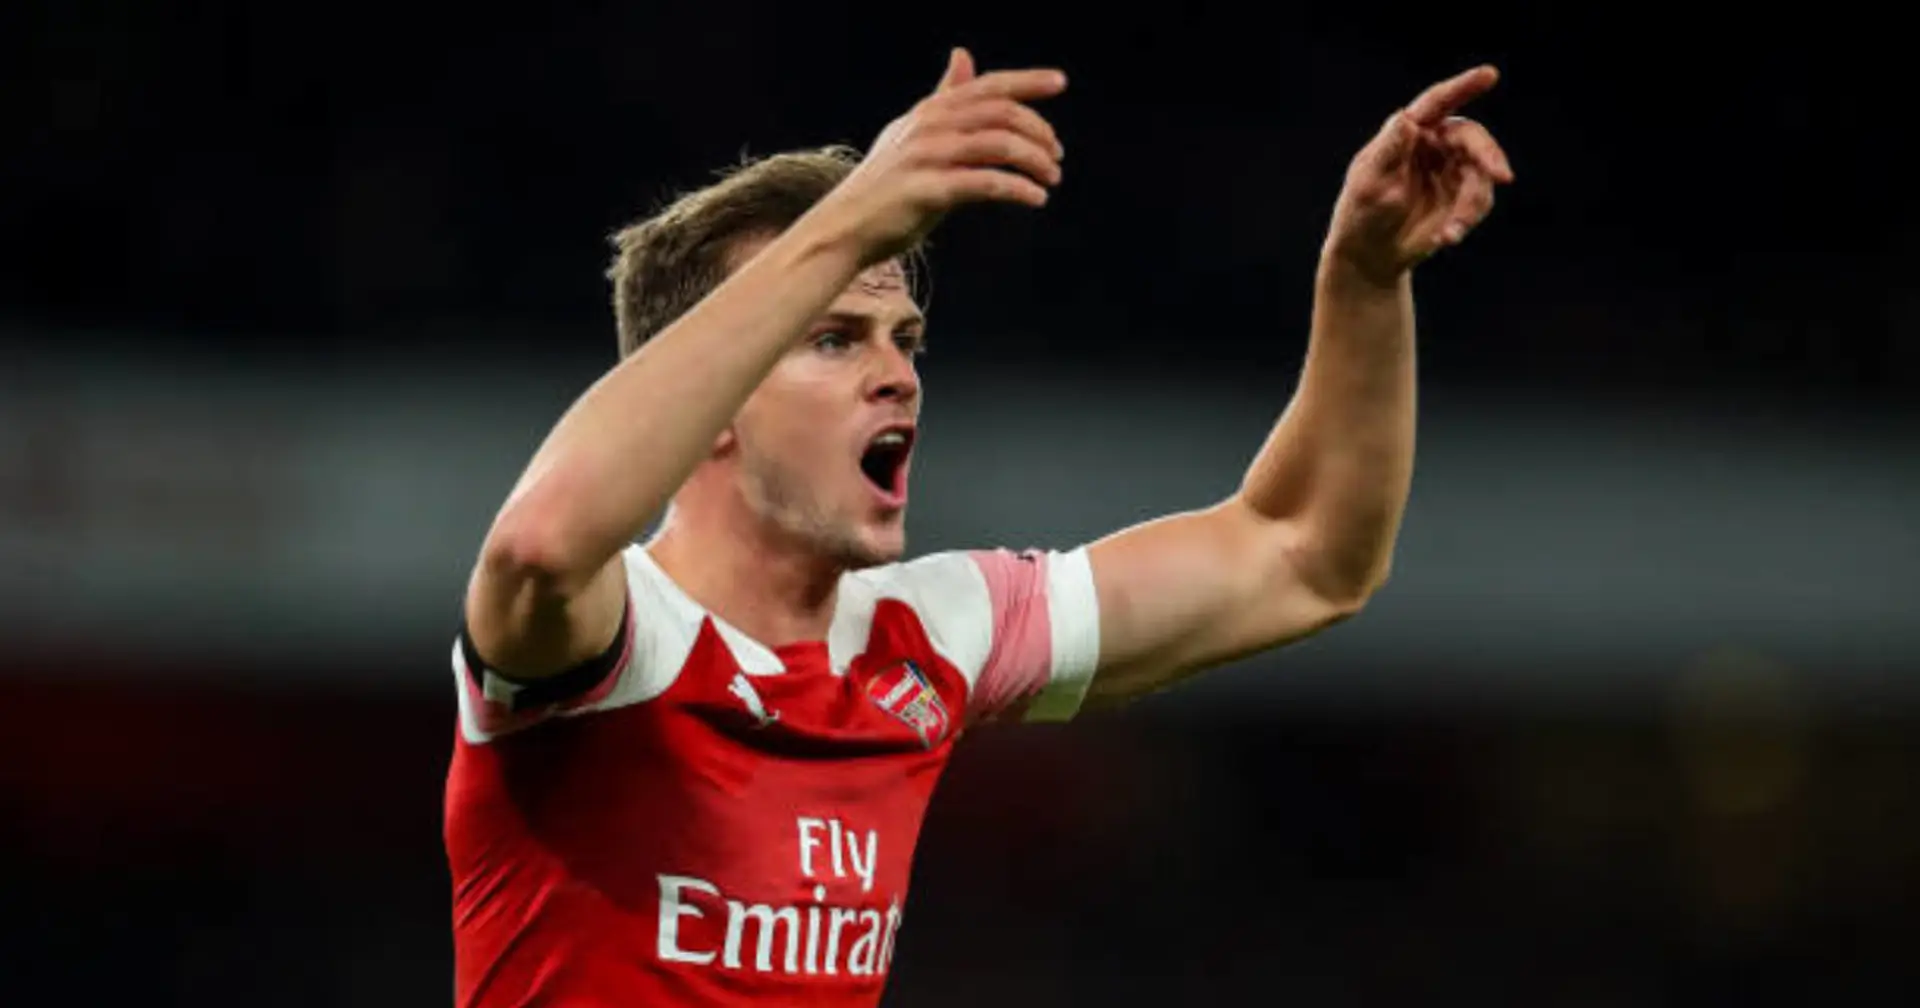 Leeds 'consider' Rob Holding as potential signing to strengthen defence